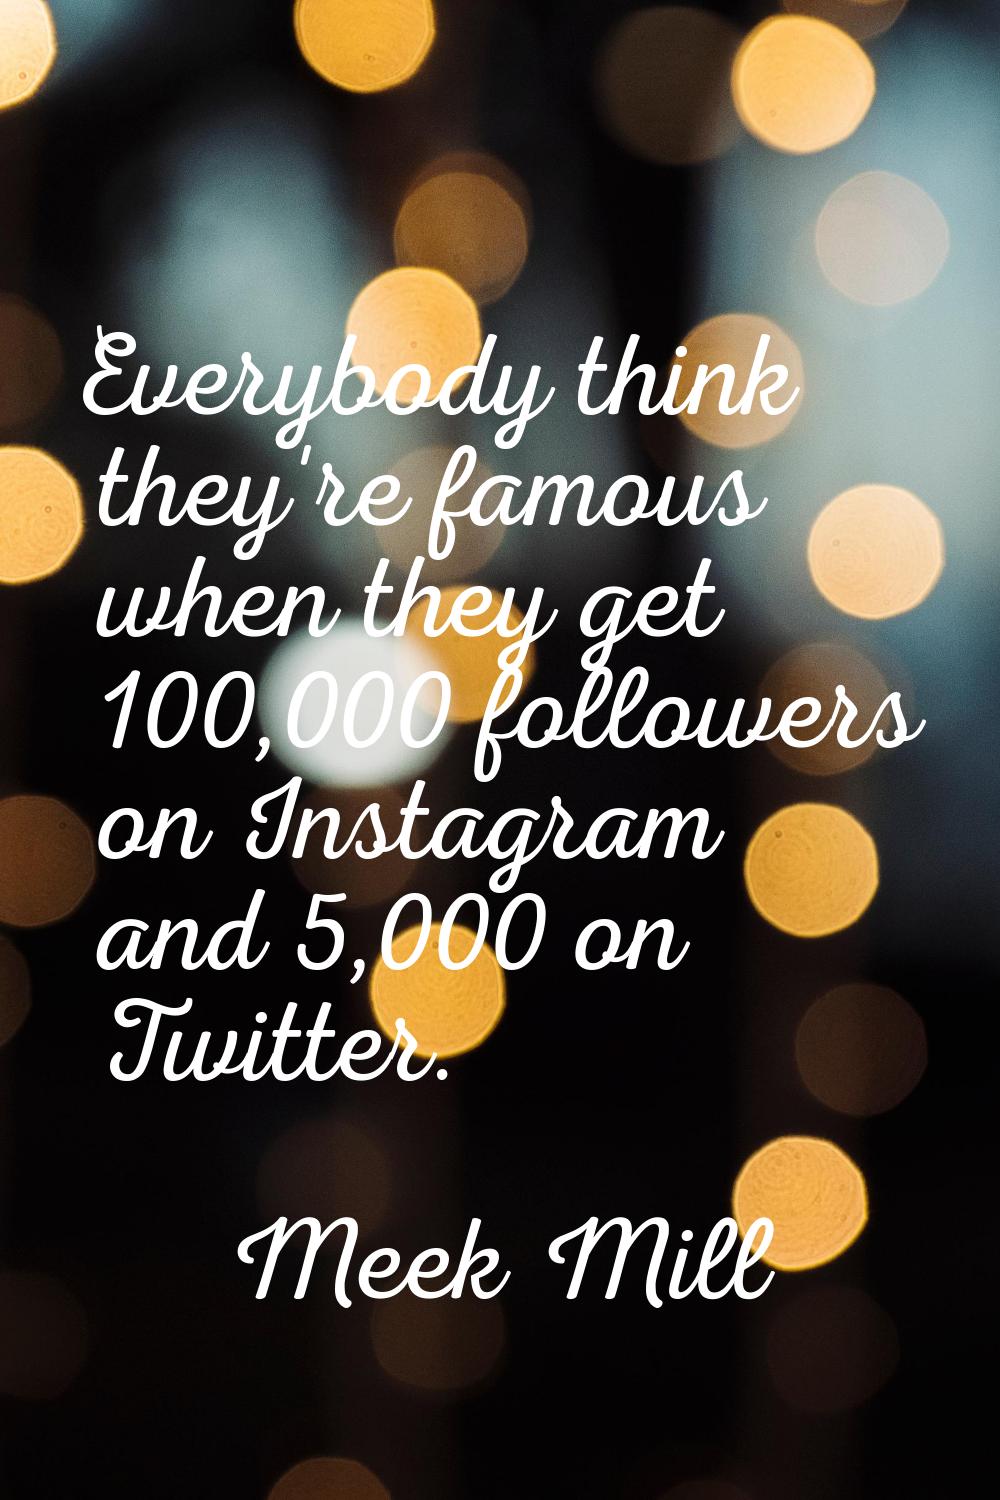 Everybody think they're famous when they get 100,000 followers on Instagram and 5,000 on Twitter.